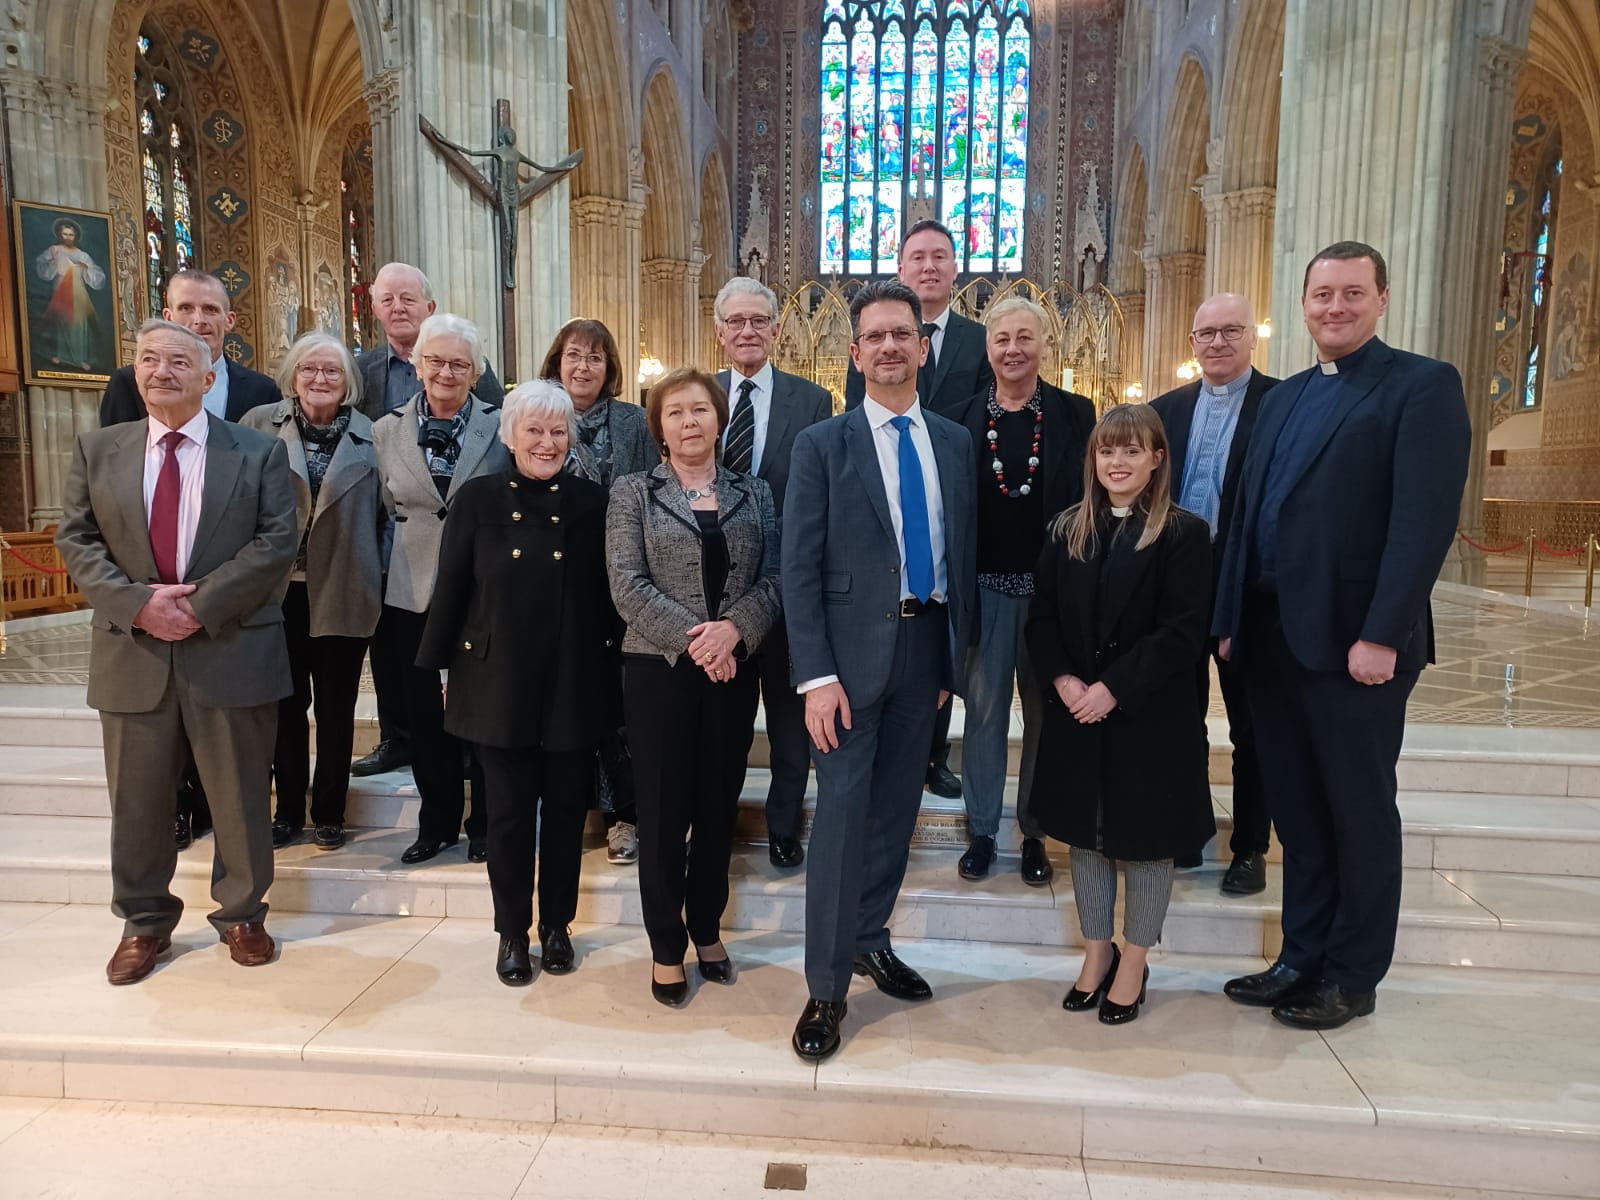 The Minister with clergy, members of the Cathedrals' Partnership and other local representatives including the Very Revd Peter McAnenly (Administrator of St Patrick's RC Cathedral) and the Very Revd Shane Forster (Dean of Armagh).